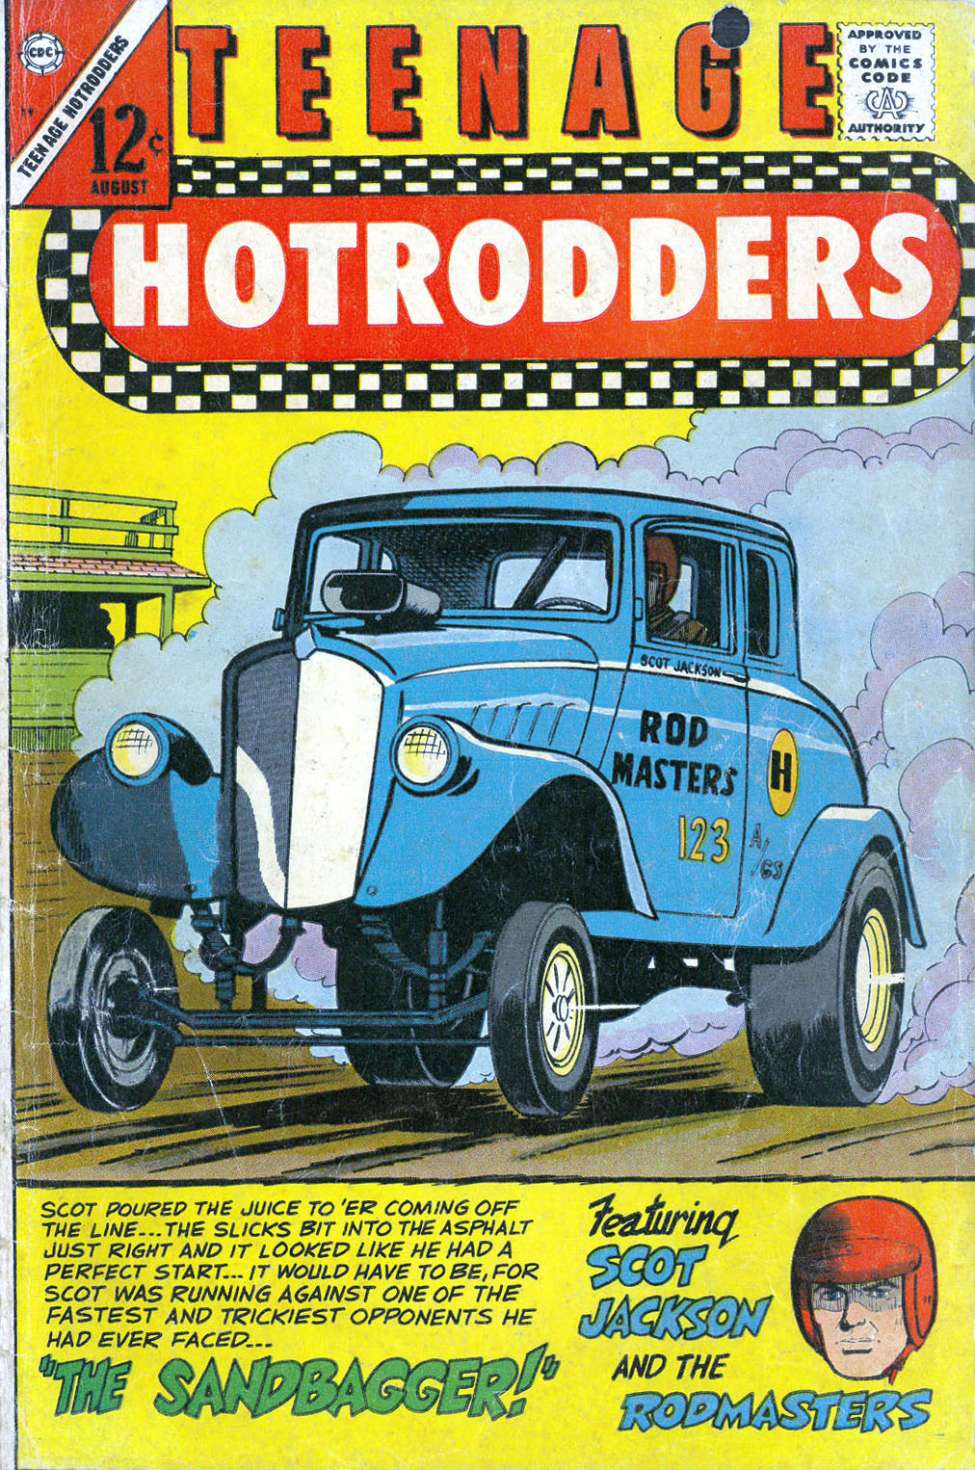 Book Cover For Teenage Hotrodders 19